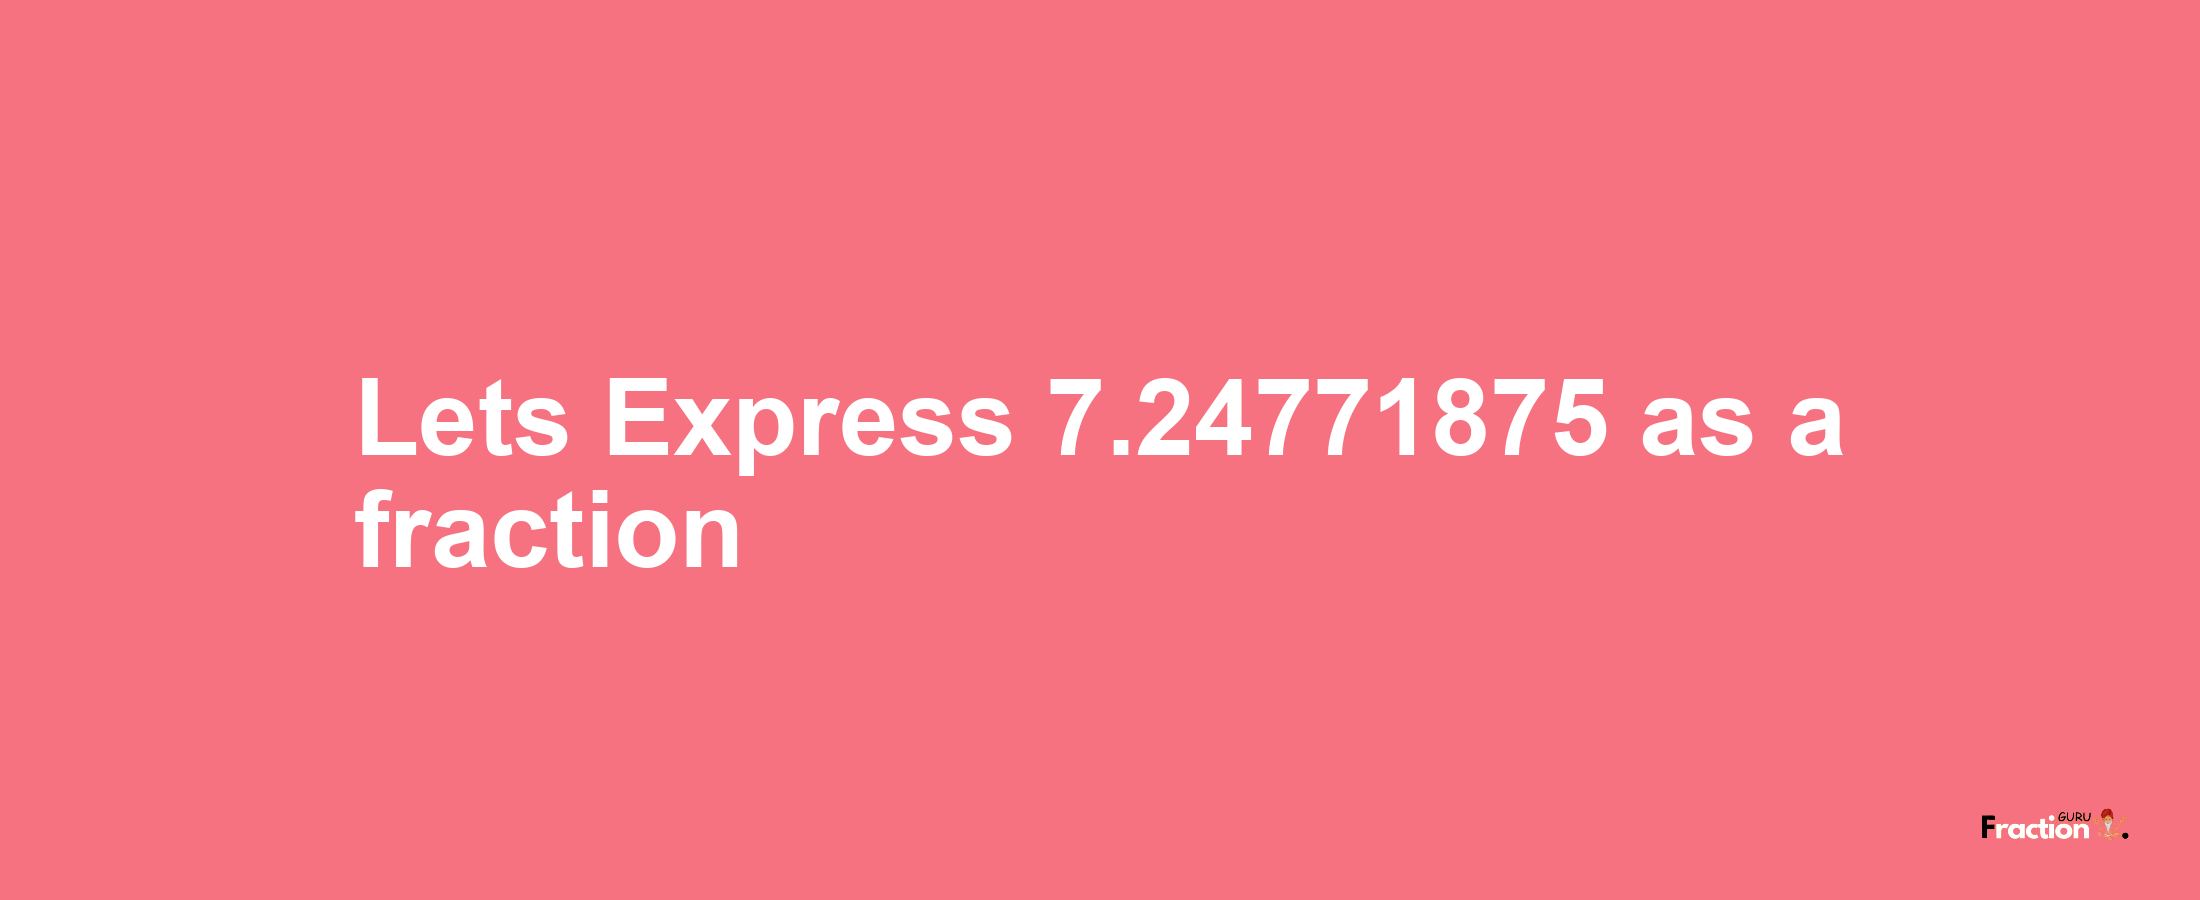 Lets Express 7.24771875 as afraction